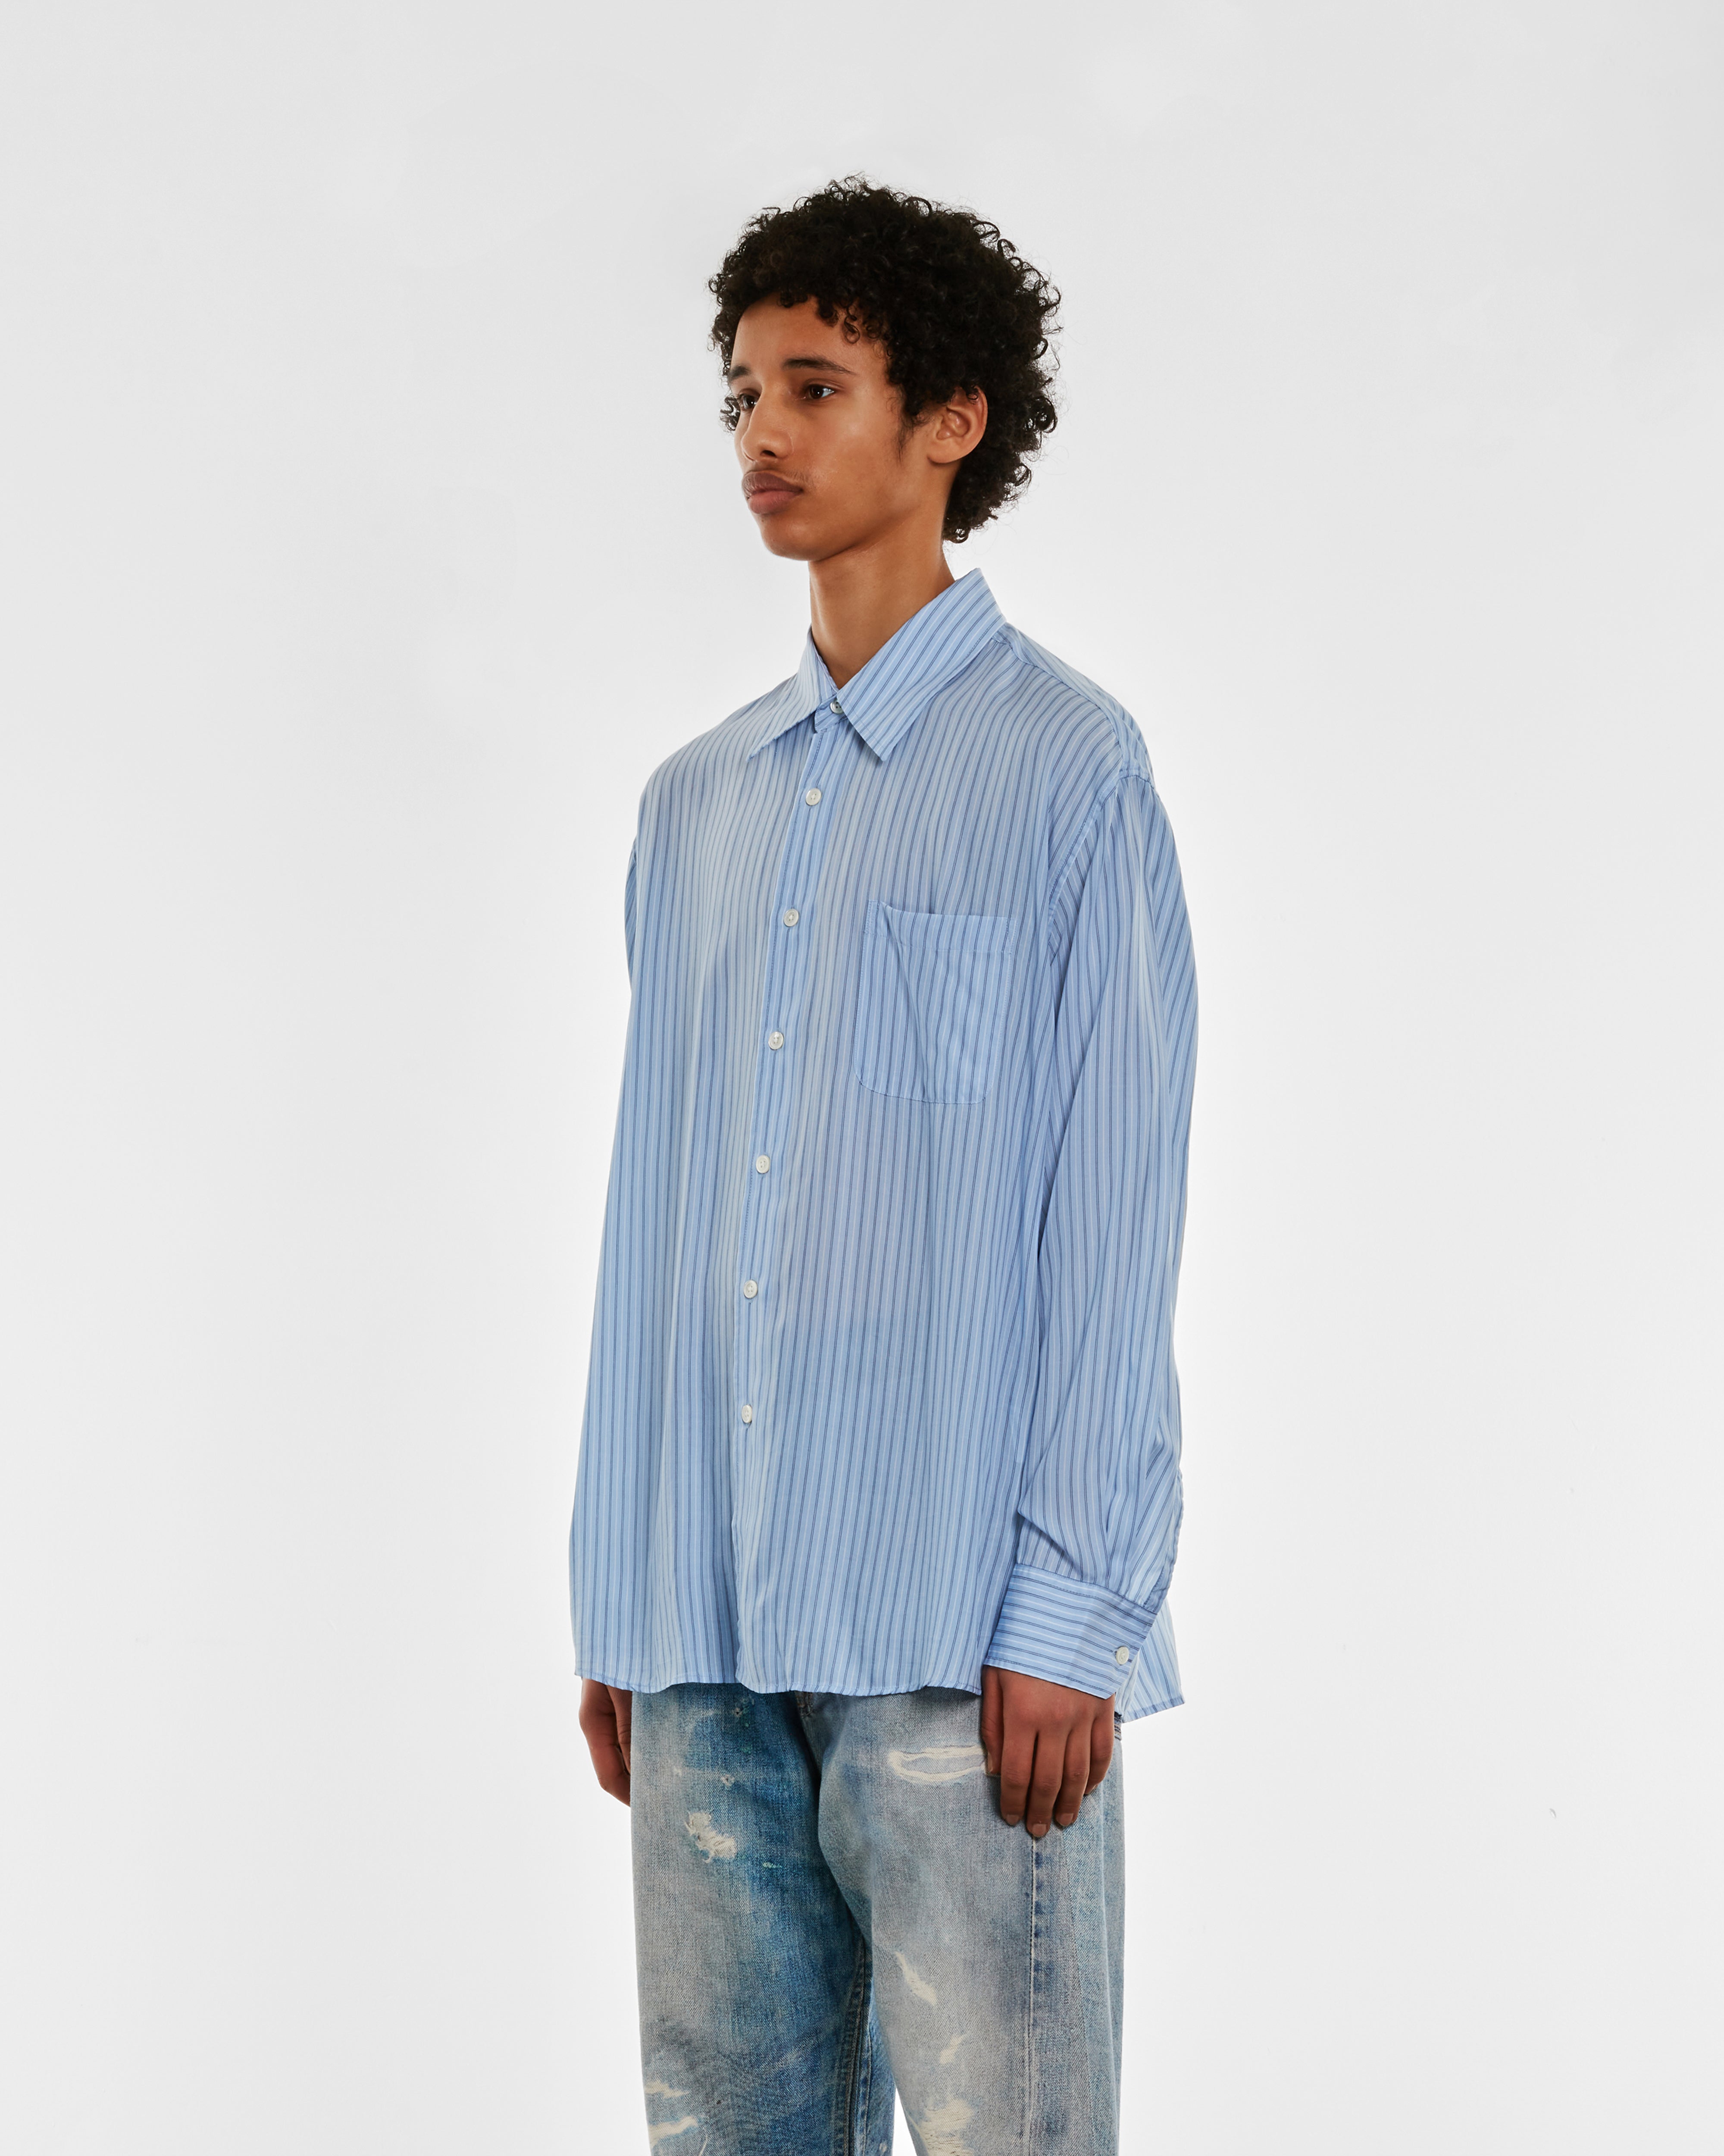 Our Legacy - Men's Above Shirt - (Flat Corp Floating Tencel)